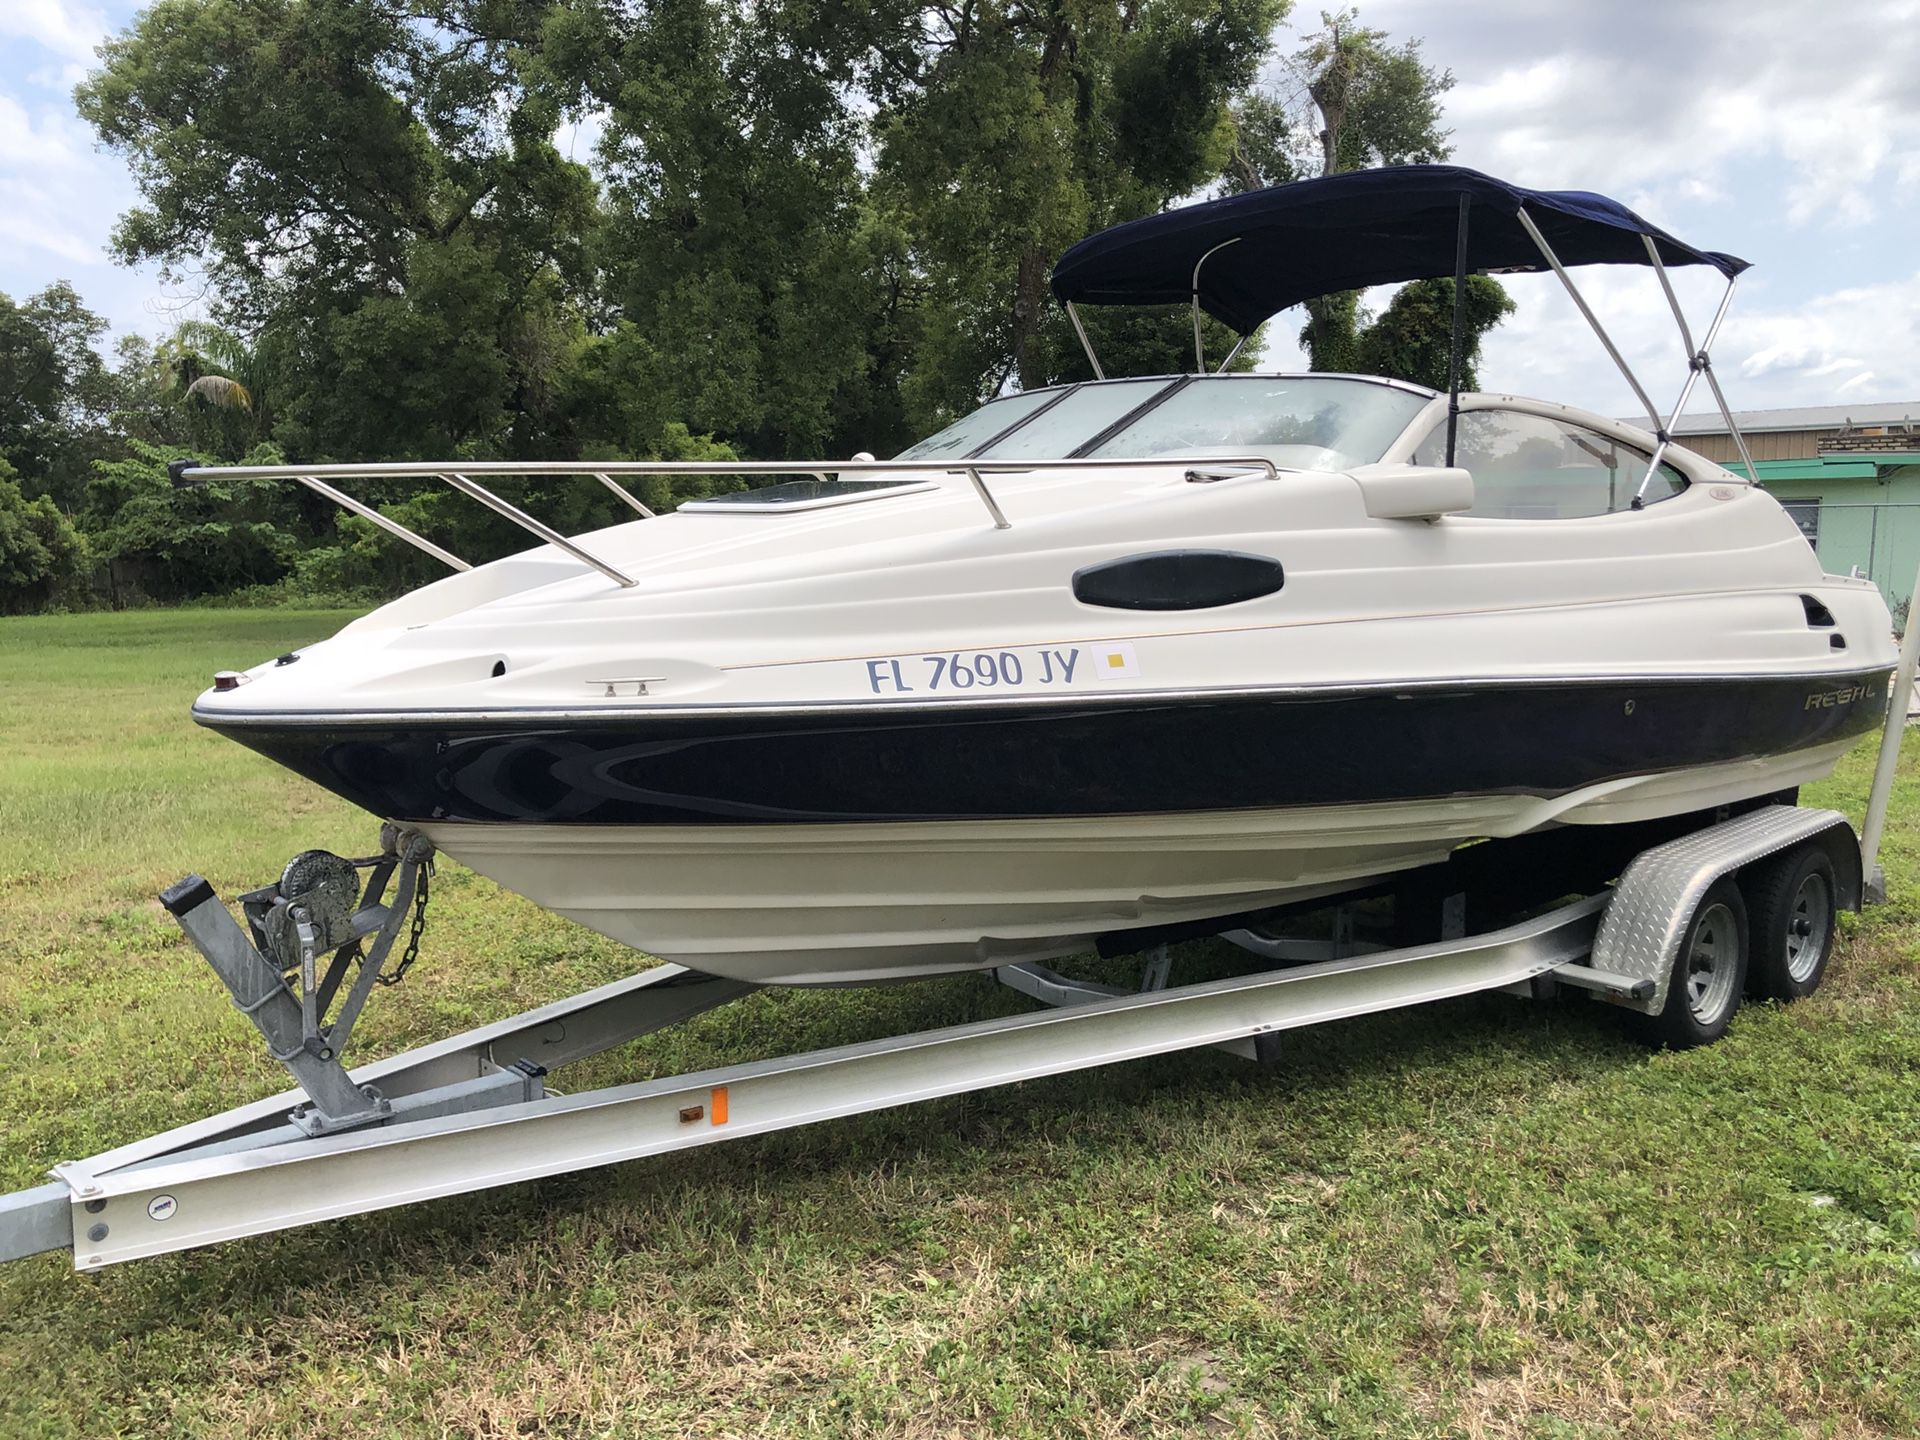 Regal 2150 LSC Boat, bote and aluminum trailer. Engine not good